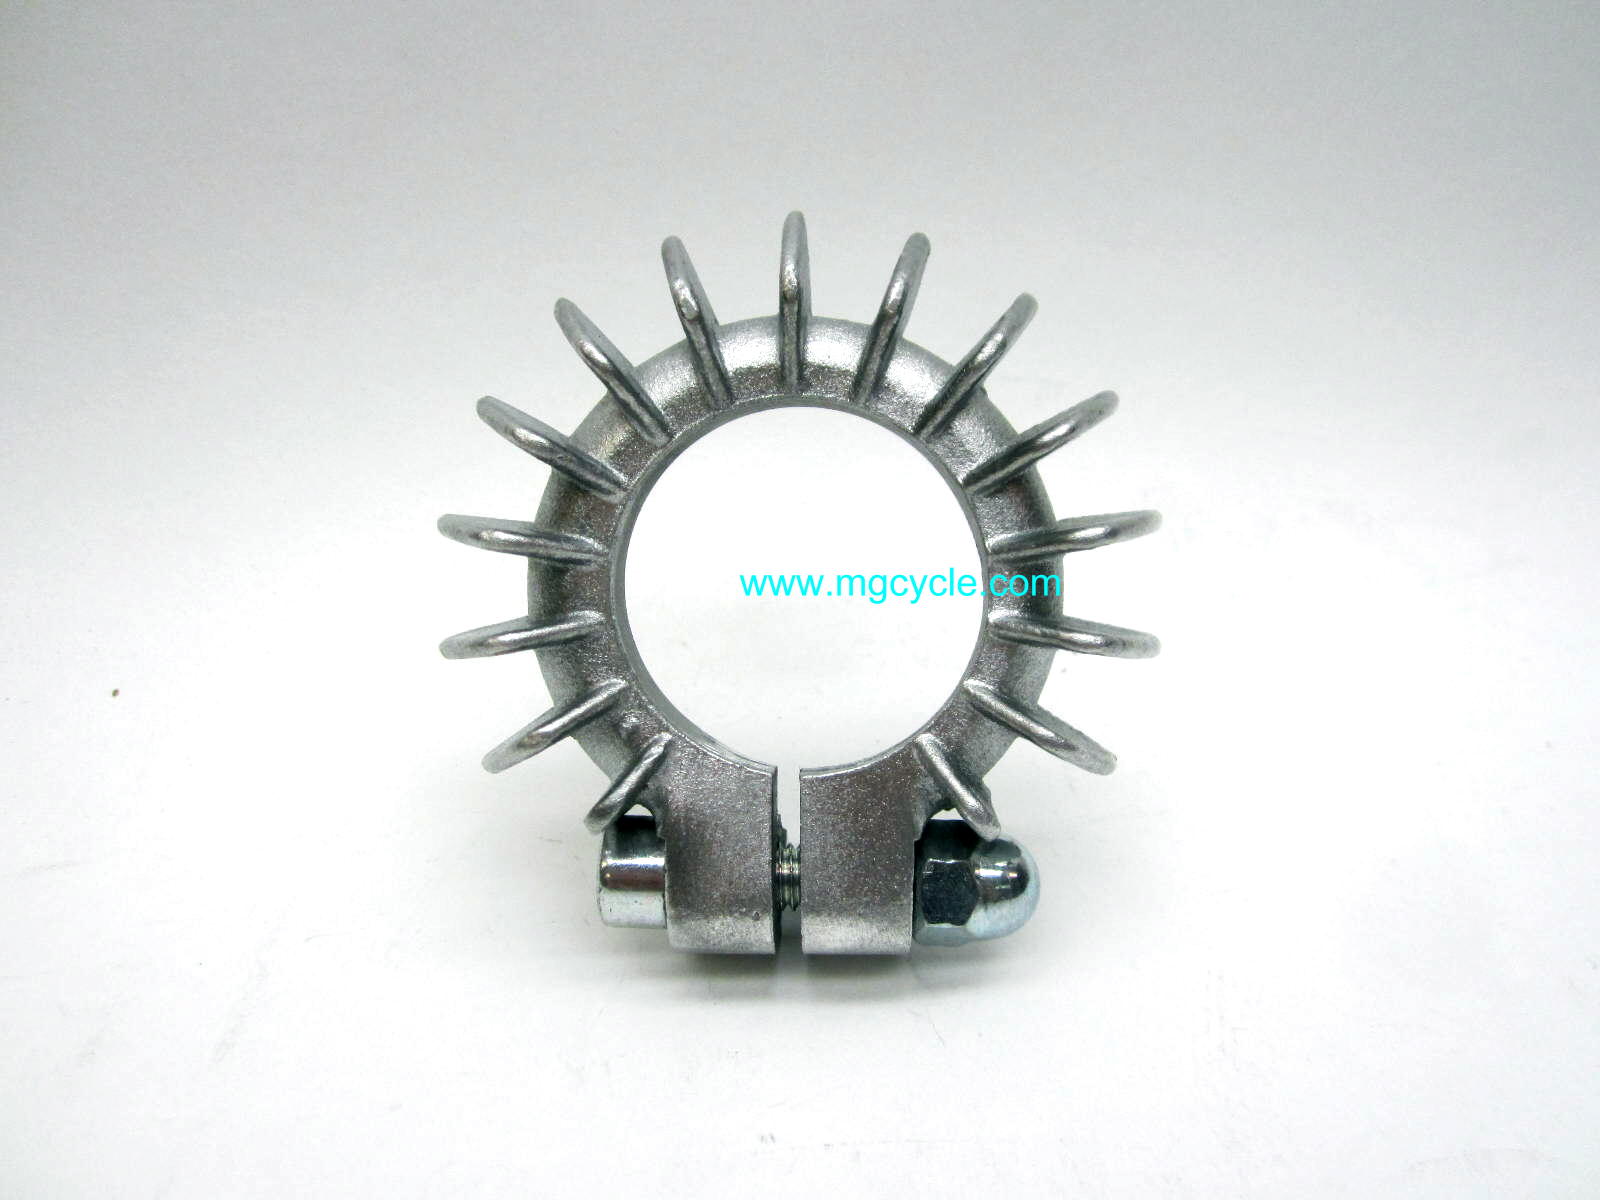 Header pipe nut clamp with cooling fins